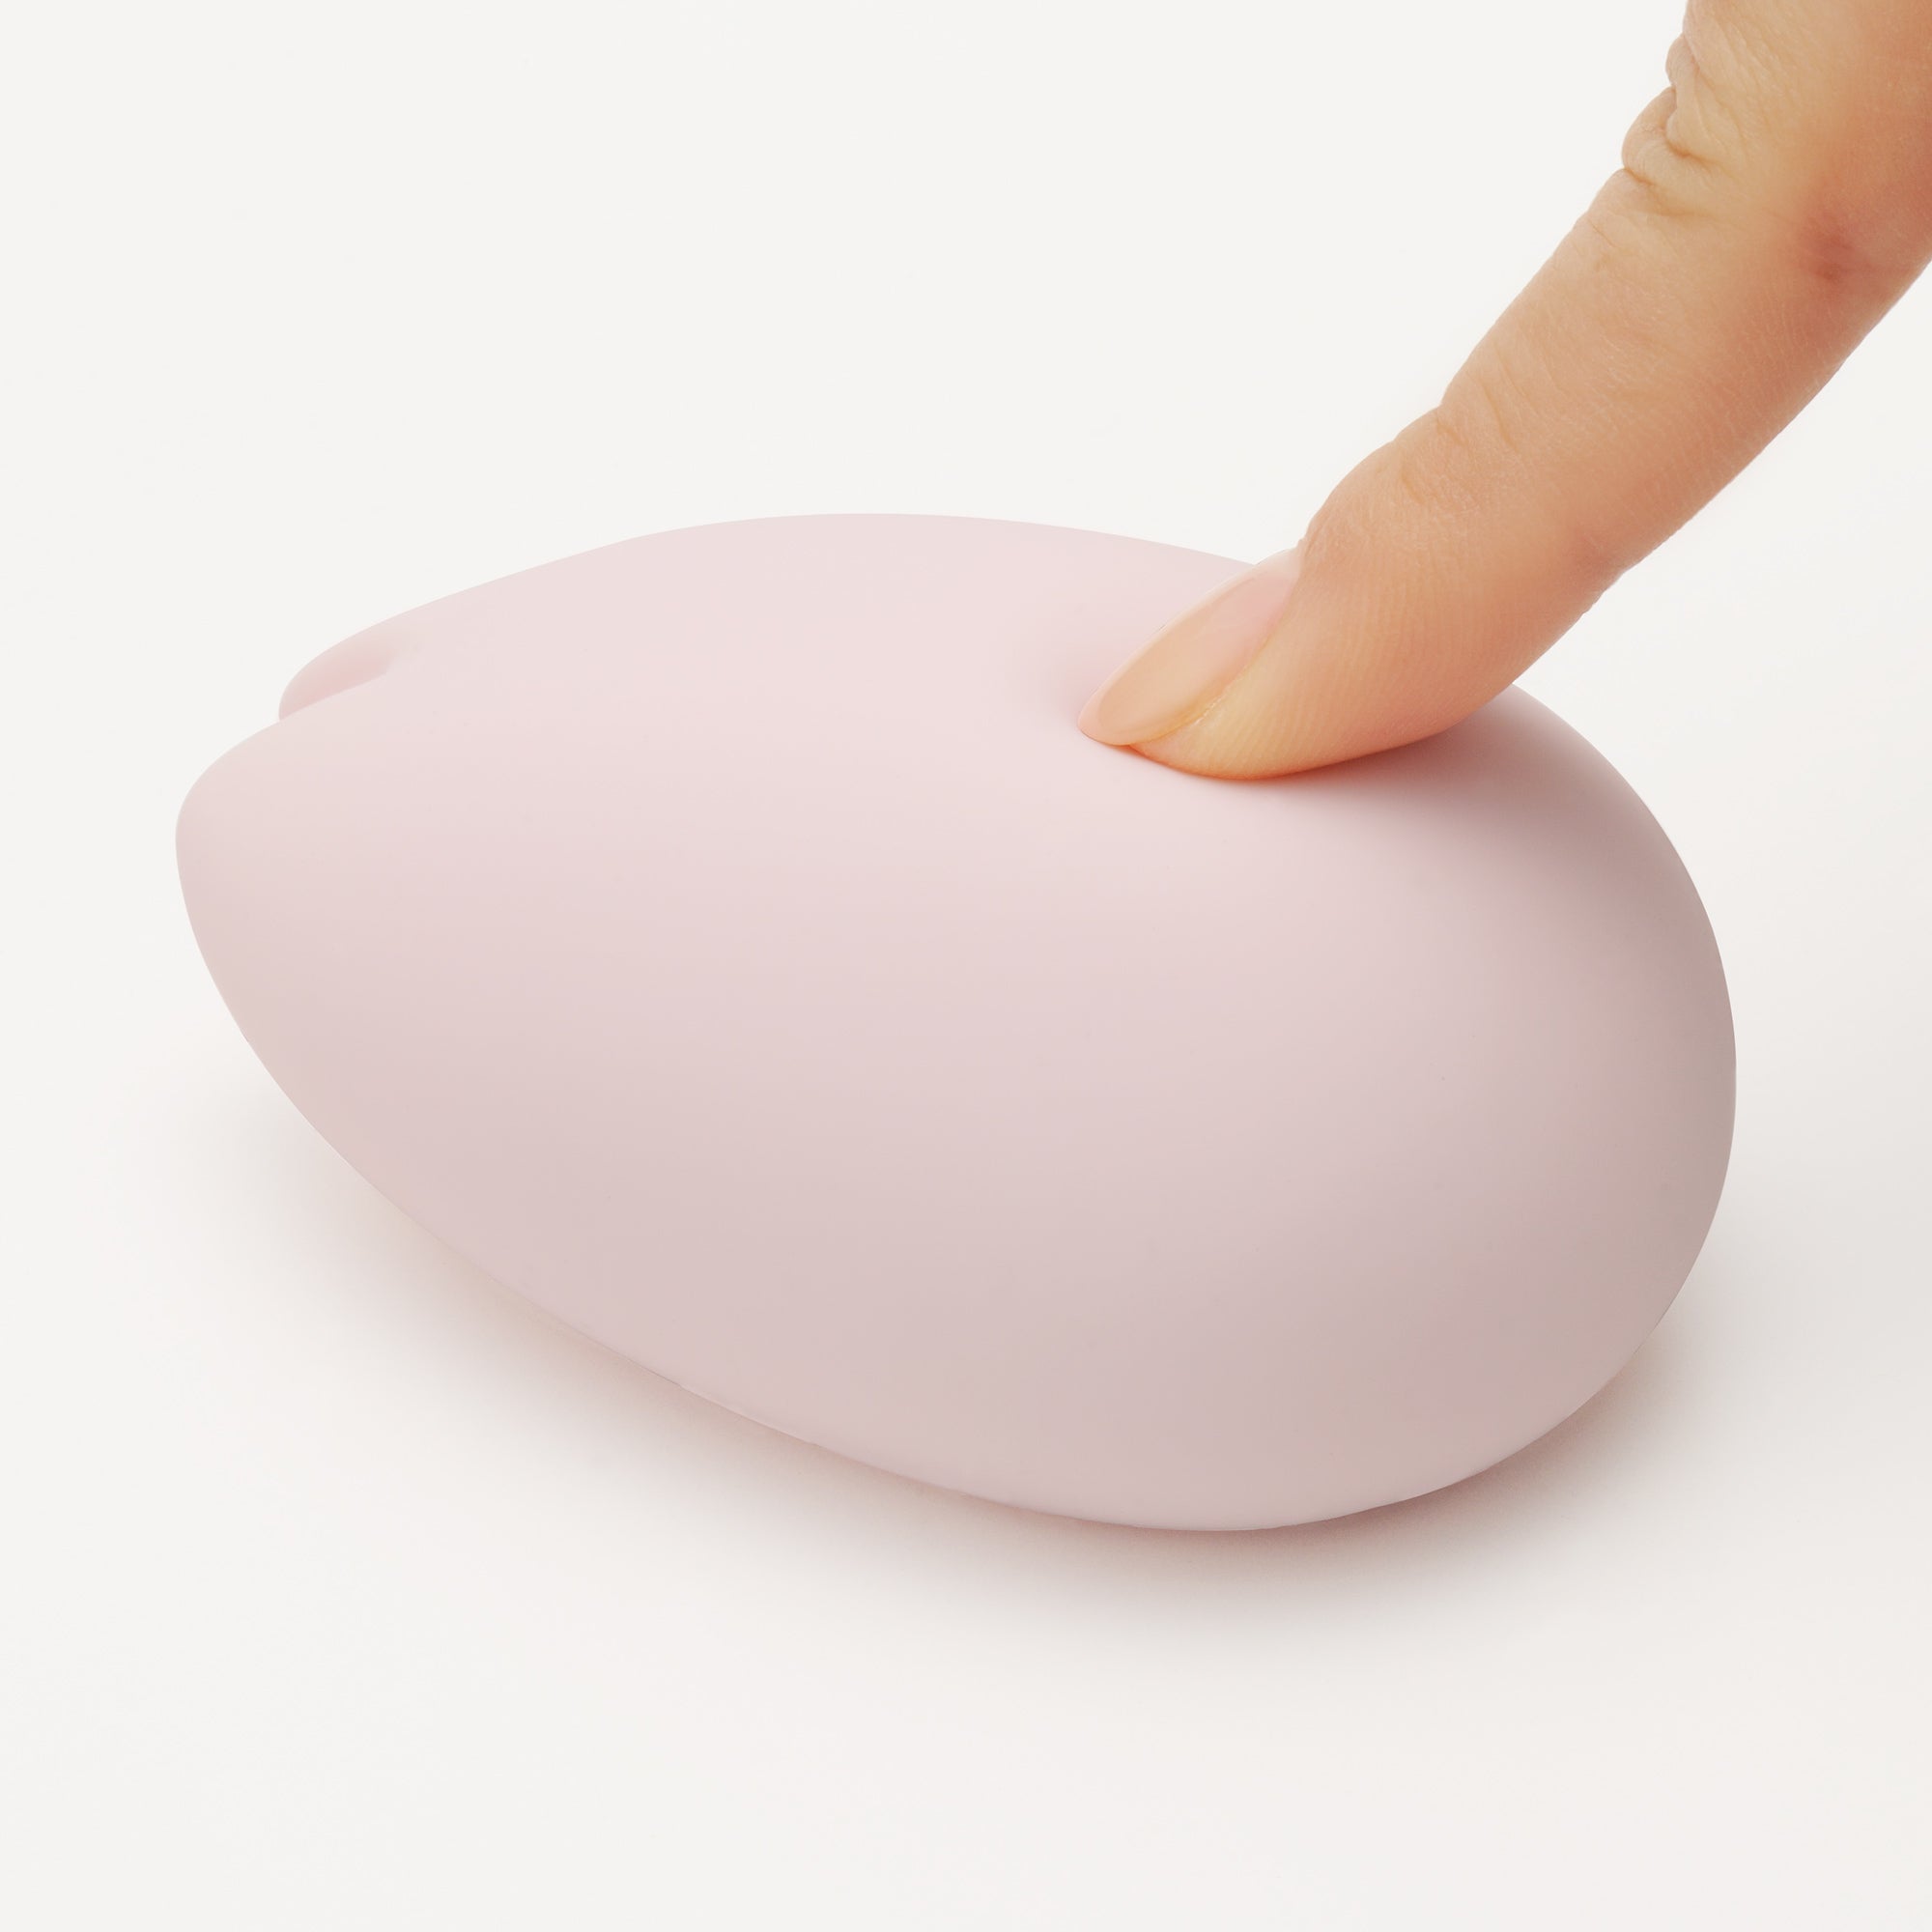 Iroha Sakura, a sleek and elegant female personal pleasure device. Sold by UK TENGA STORE, the design is inspired by the delicate beauty of a cherry blossom, with its soft pink color and unique shape. The product is thoughtfully crafted to provide comfort and satisfaction